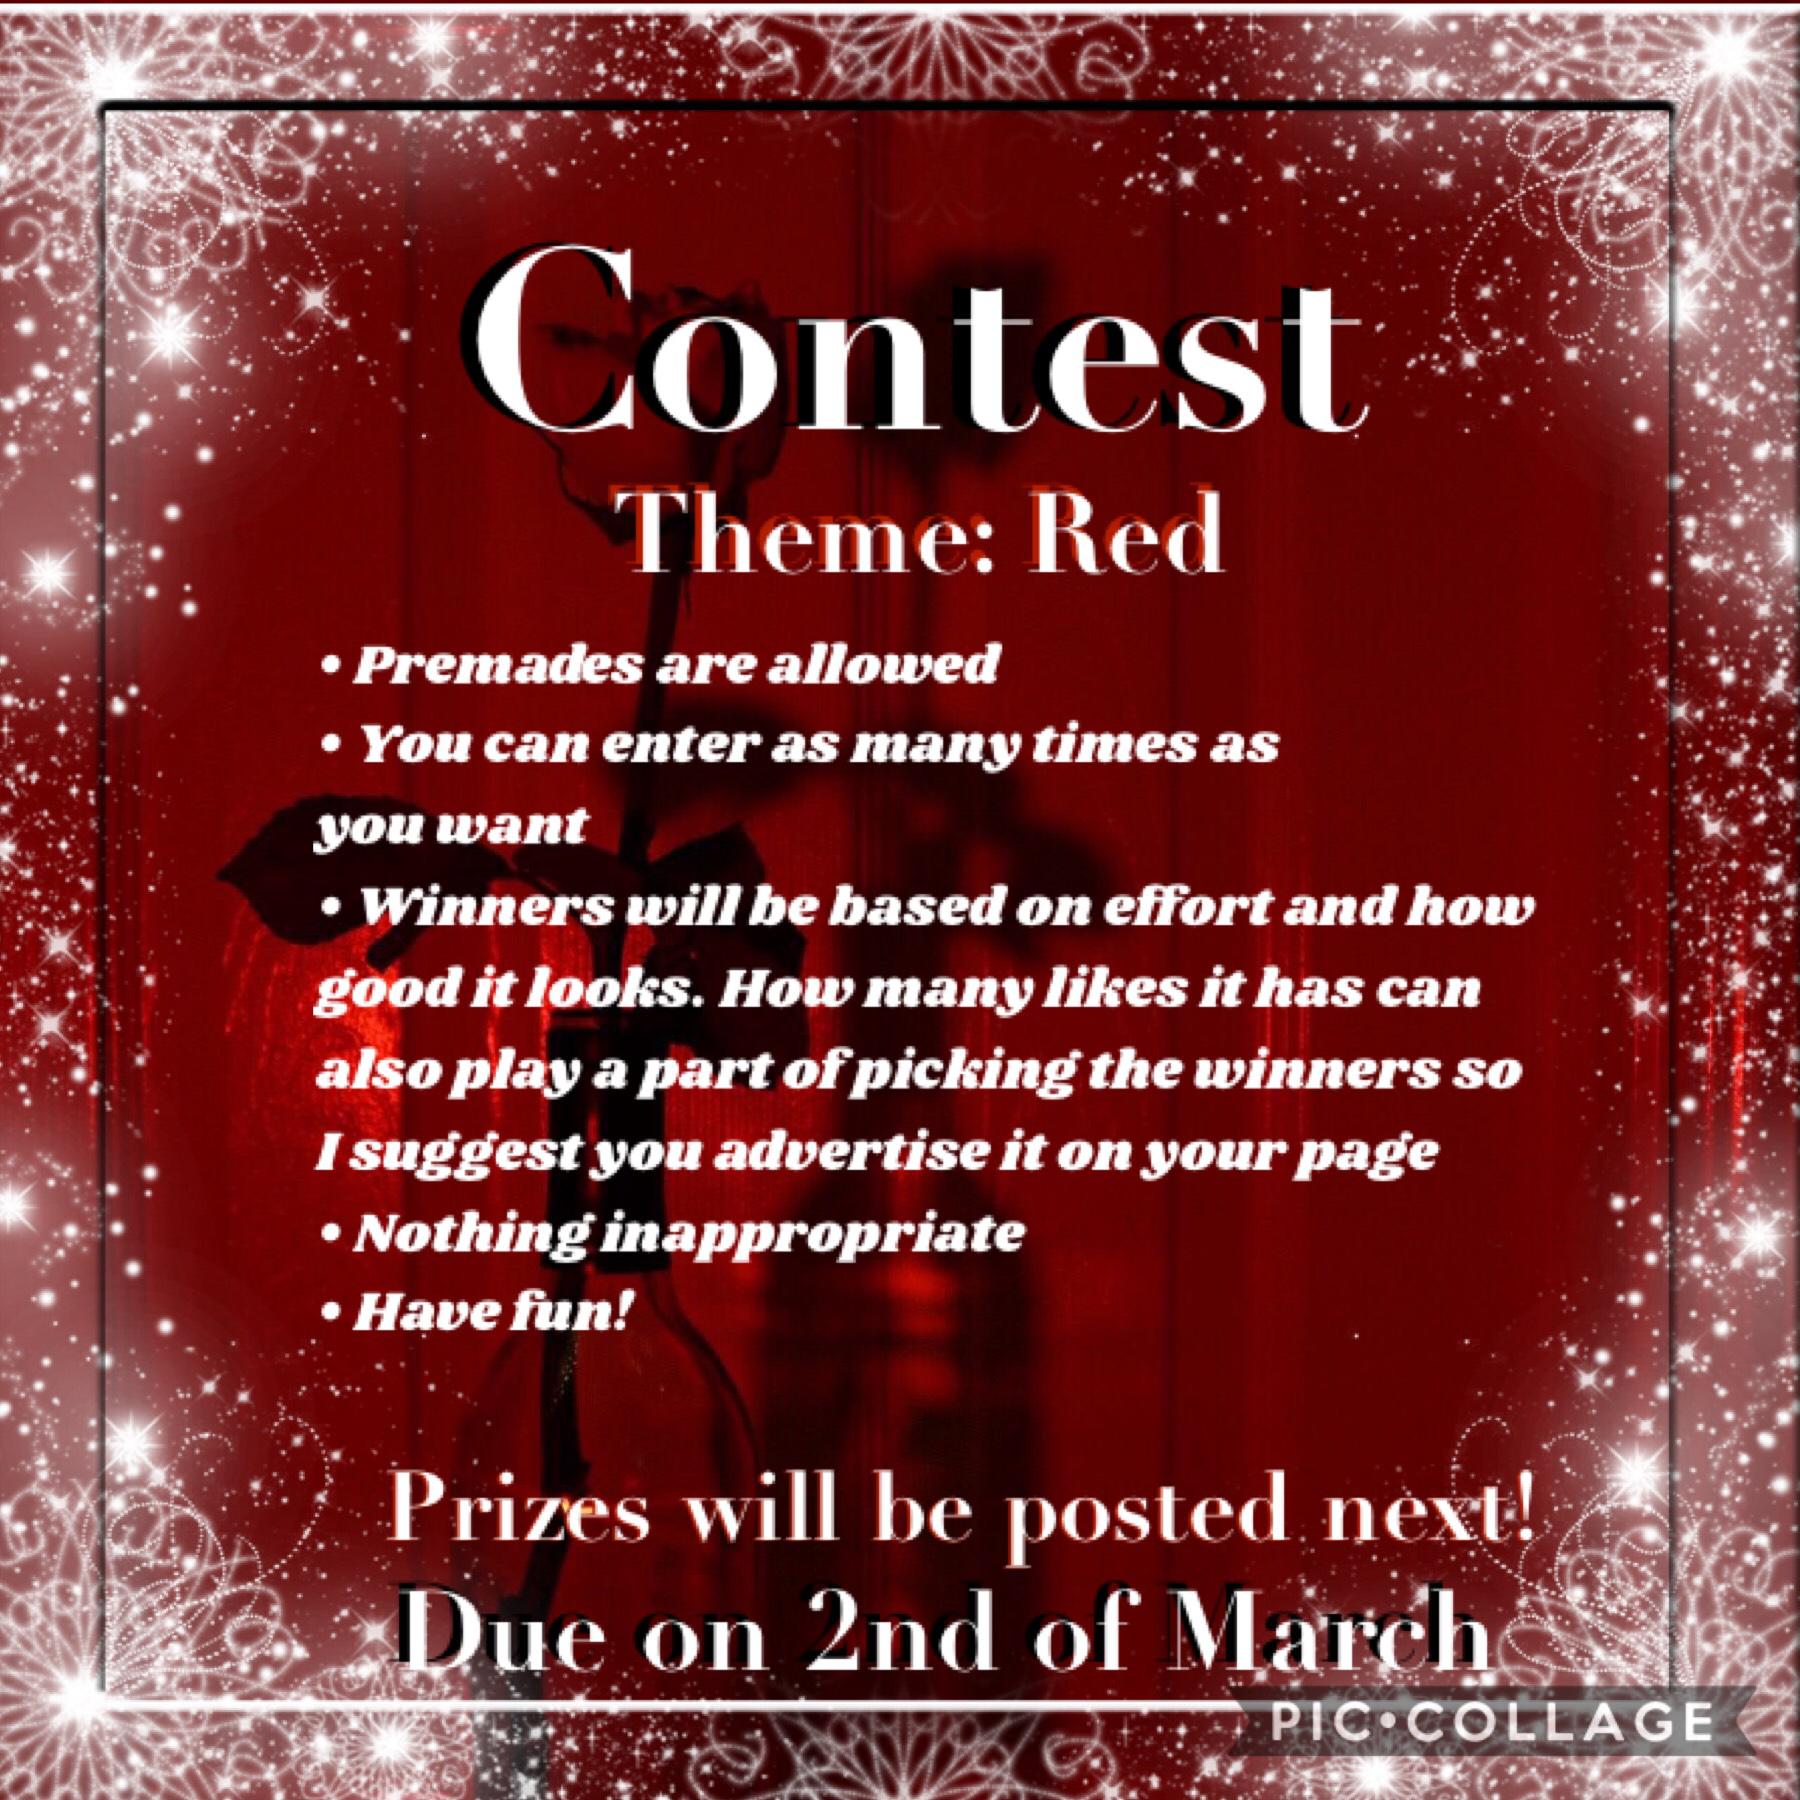 🌹 t a p 🌹

Yooo it’s been so long since I’ve done a contest and I really wanted to give something back to all my wonderful and amazing followers! Thank y’all so much❤️